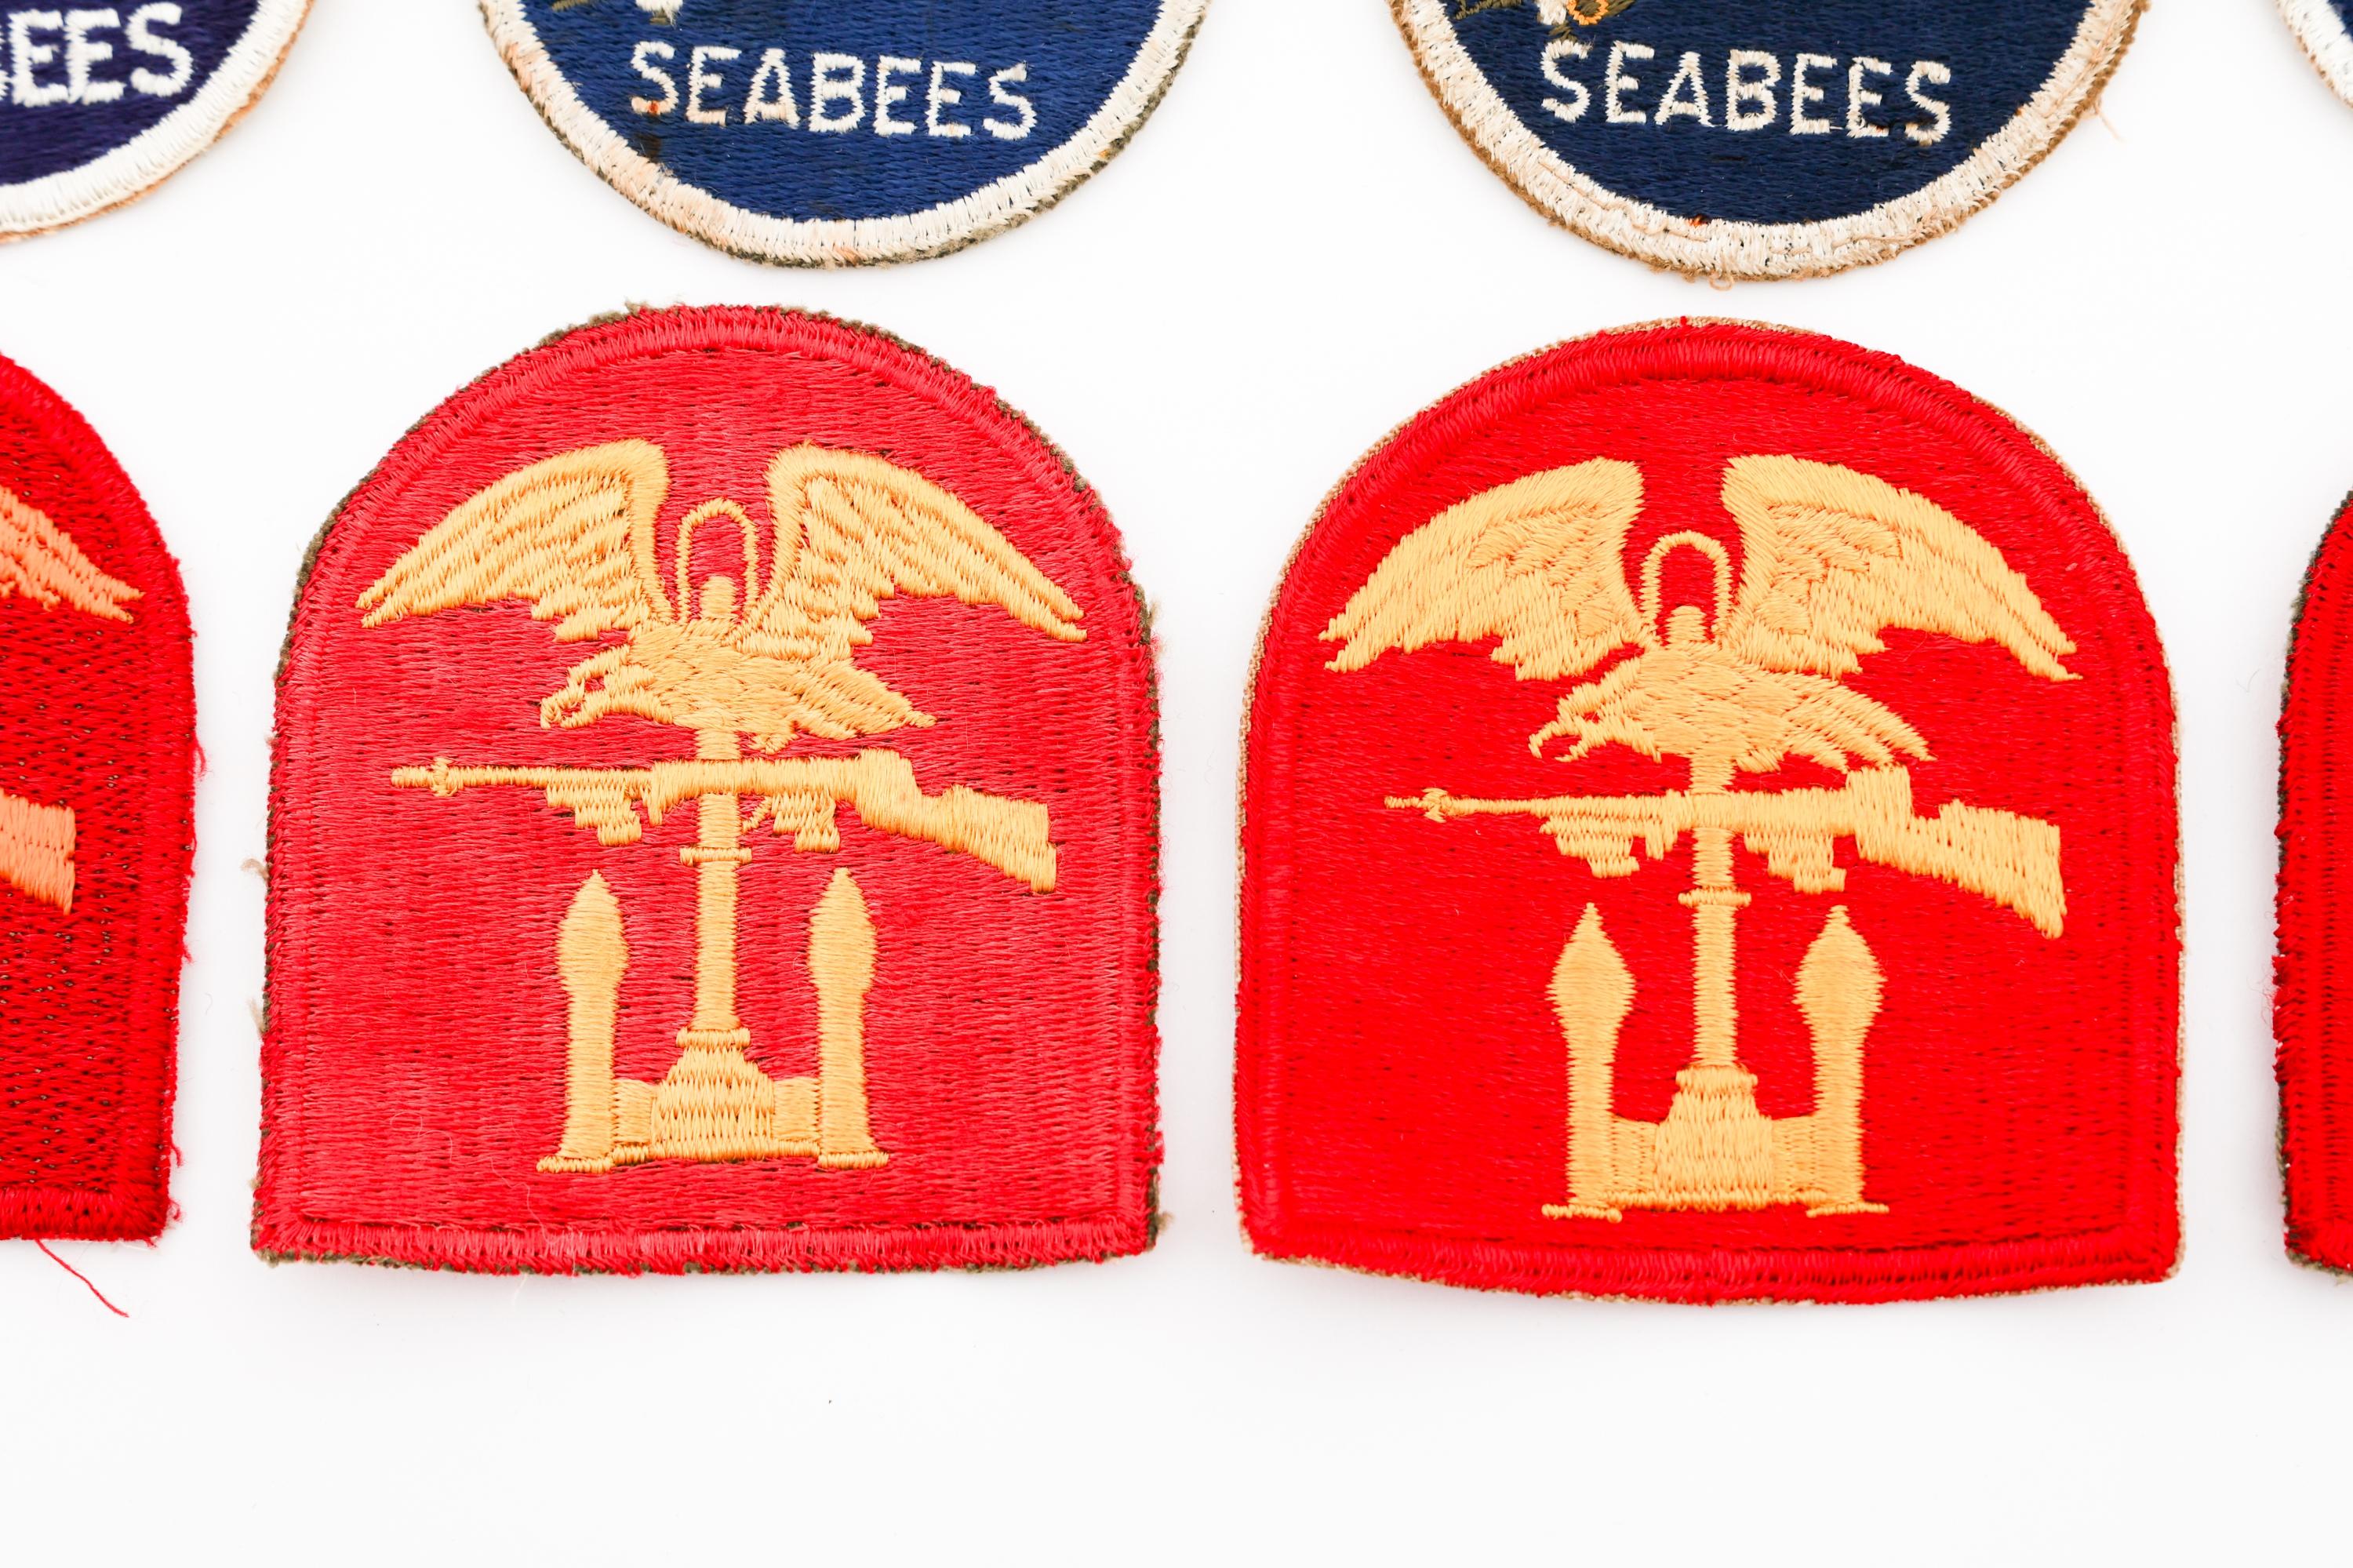 WWII USN, MERCHANT MARINE, & SWEETHEART PATCHES